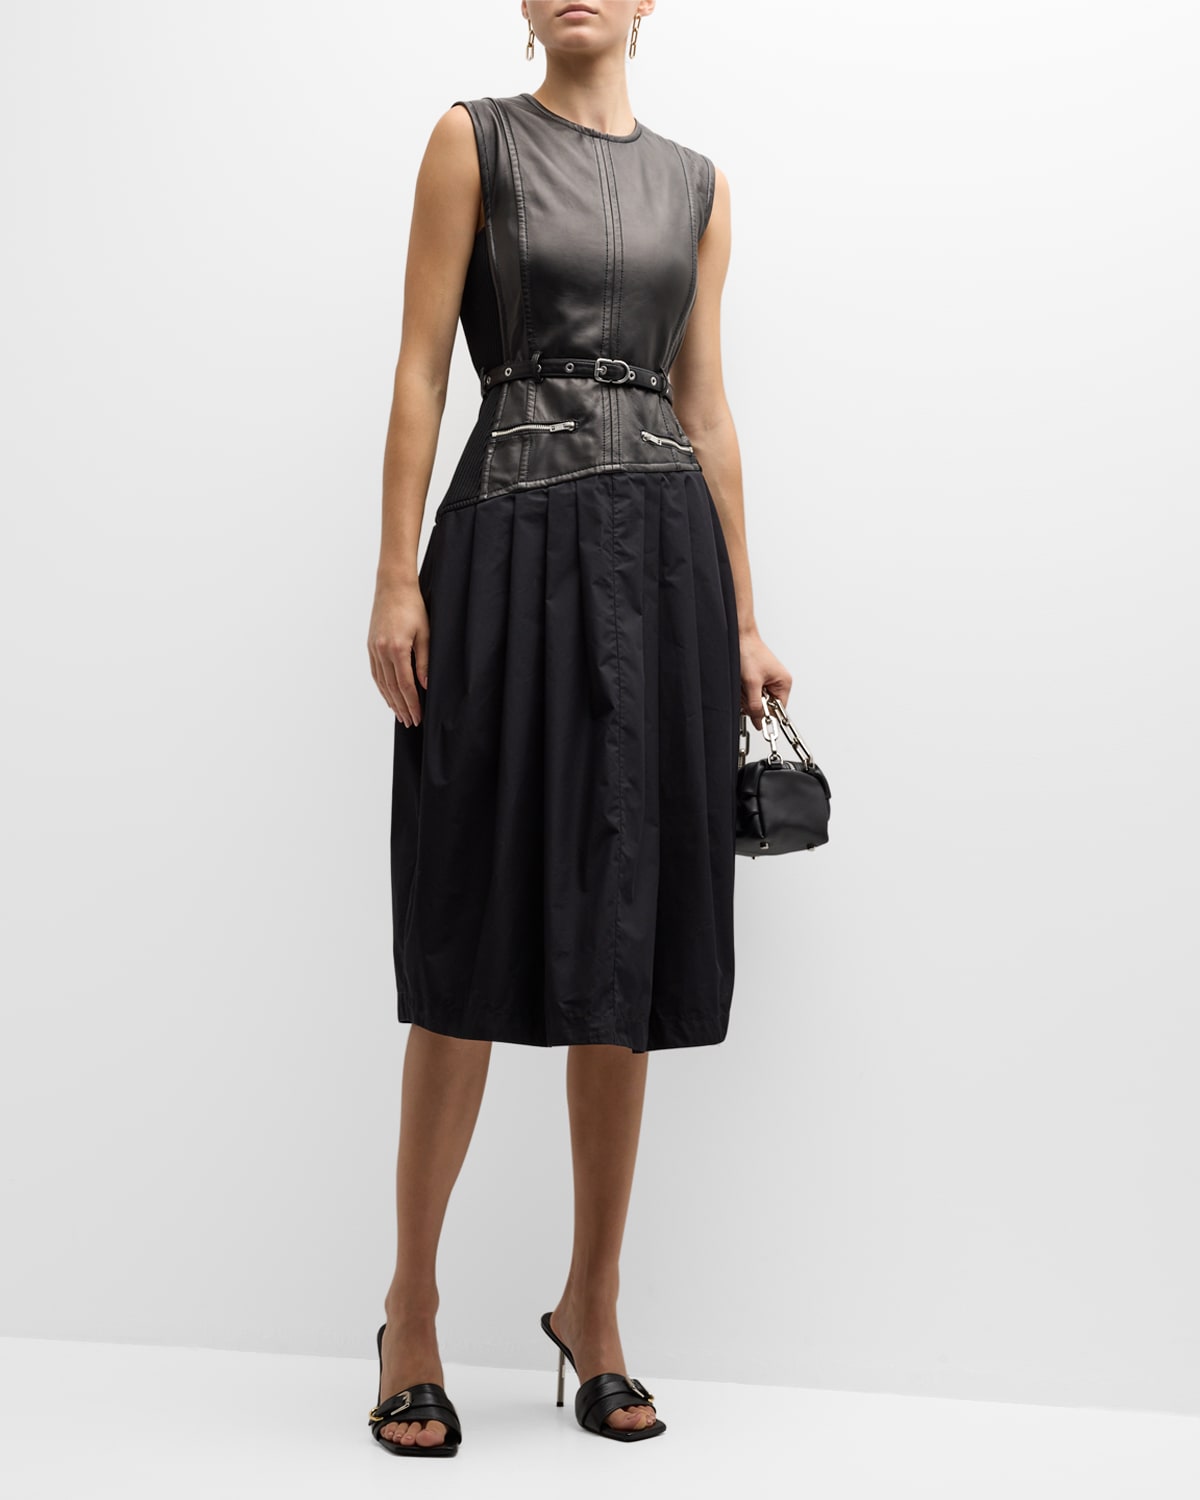 3.1 Phillip Lim Belted Mixed Media Dress In Black